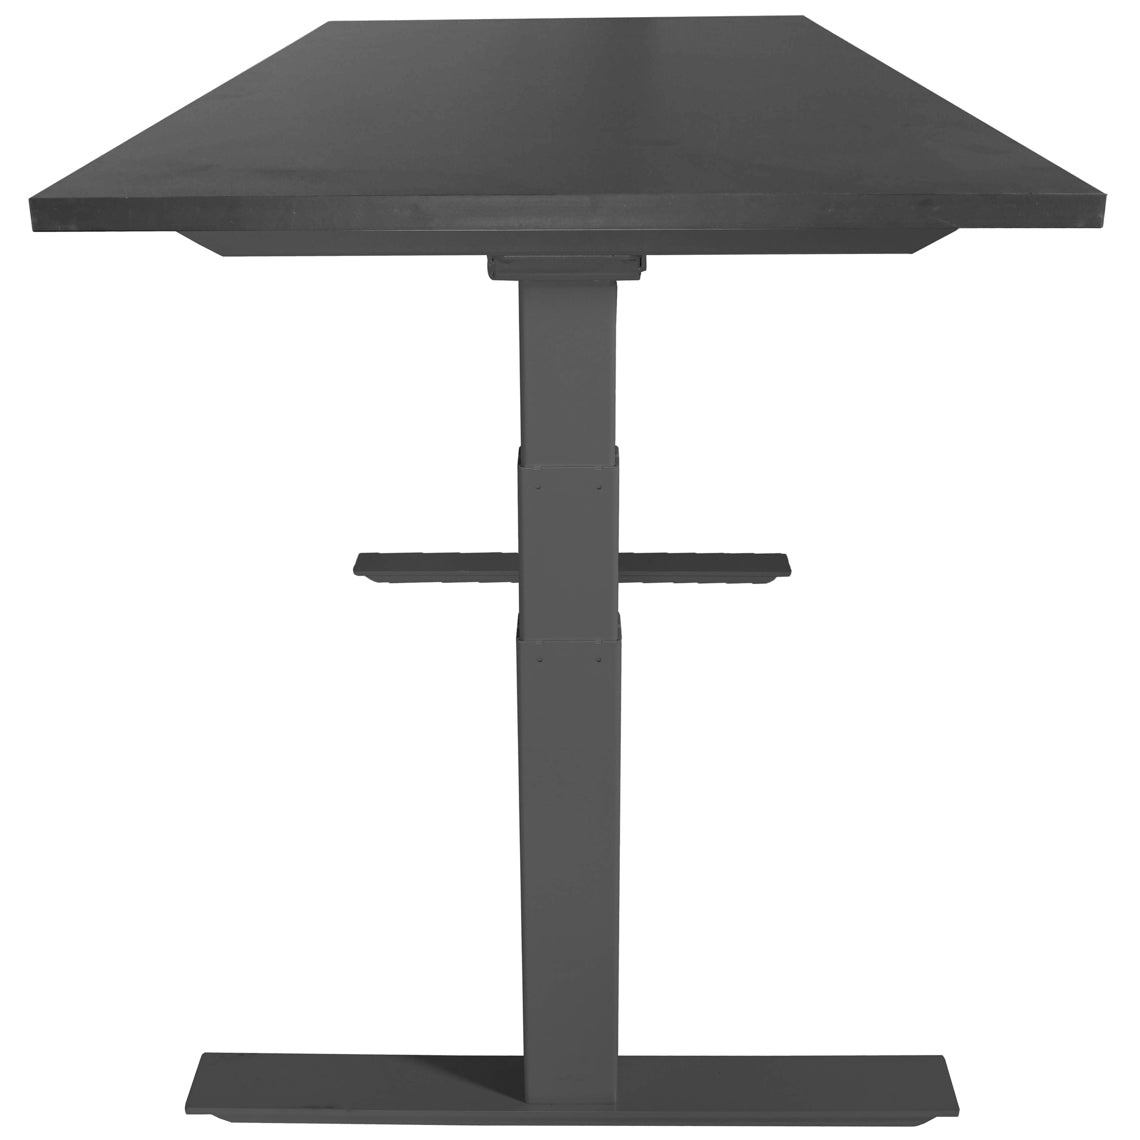 A6 Adjustable Sit To Stand Desk 24"- 50" w/ Black 30" x 48" Top - view 2